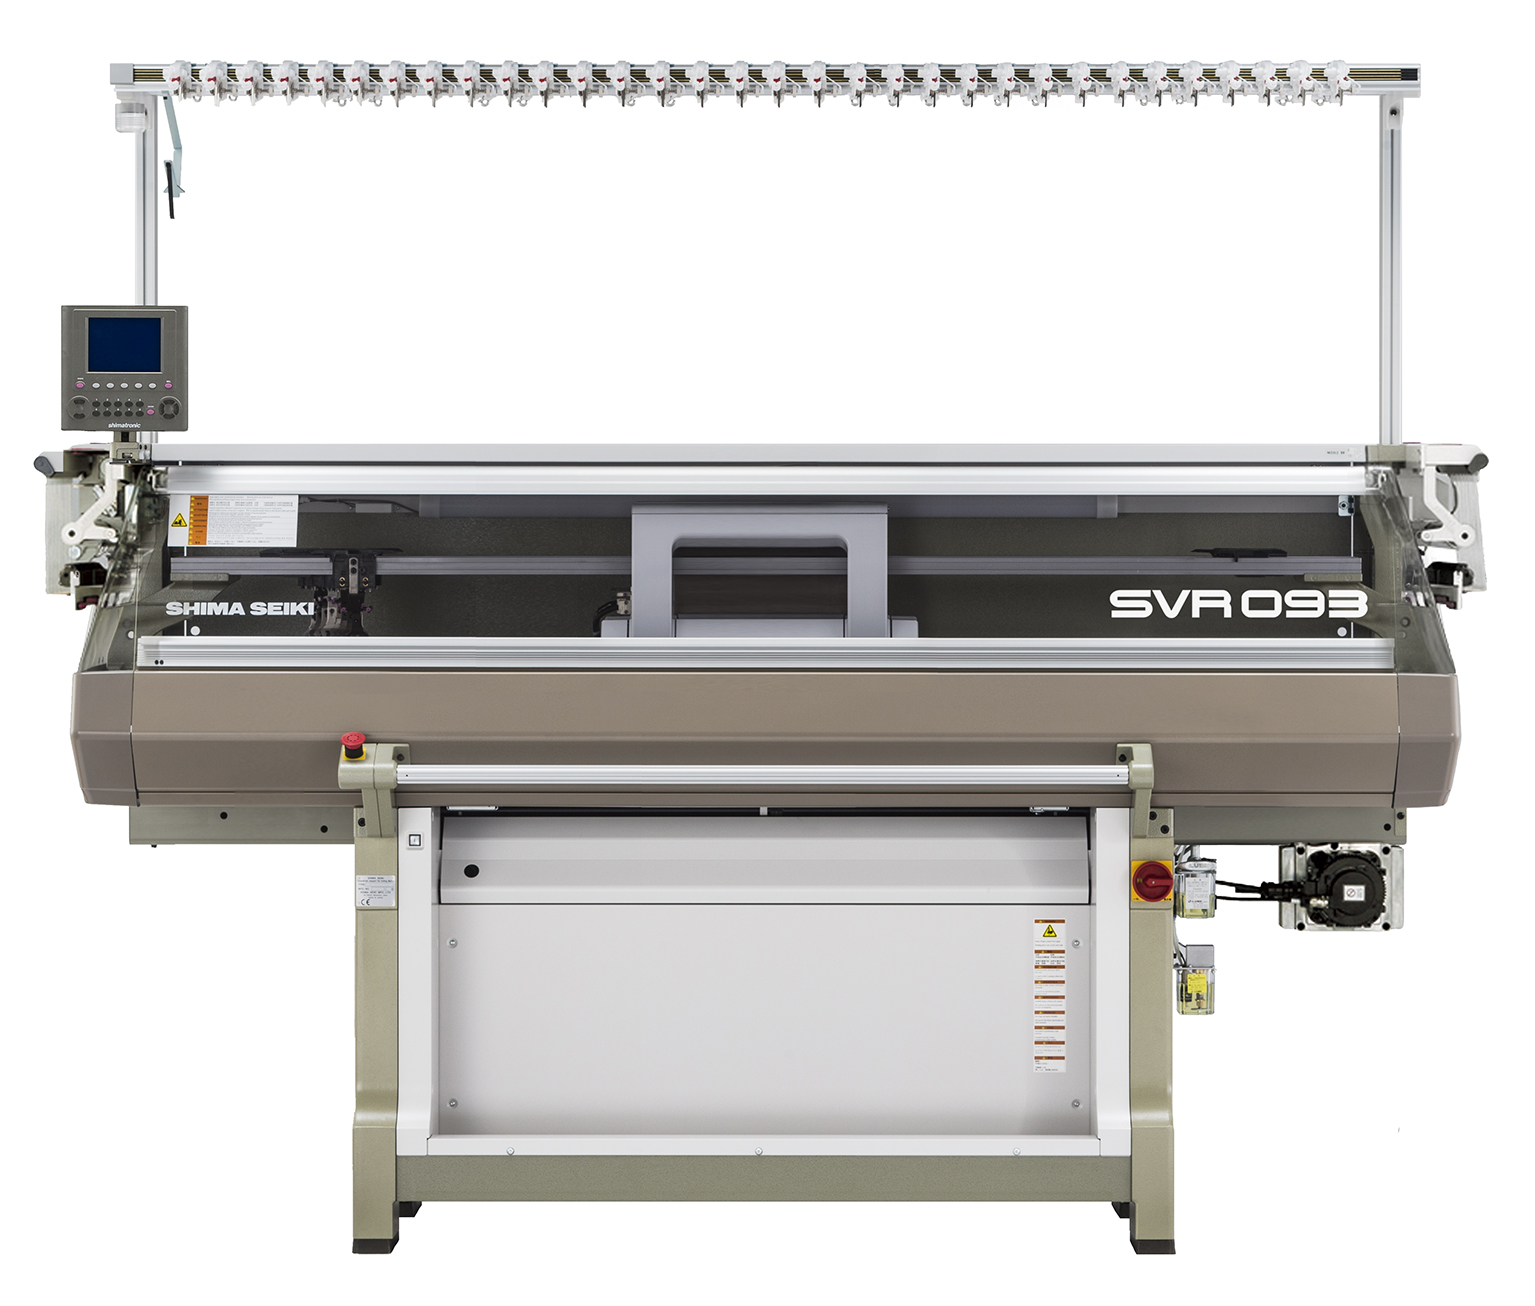 The compact SVR093 machine with a short knitting width intended for knitting shoe uppers. © Shima Seiki